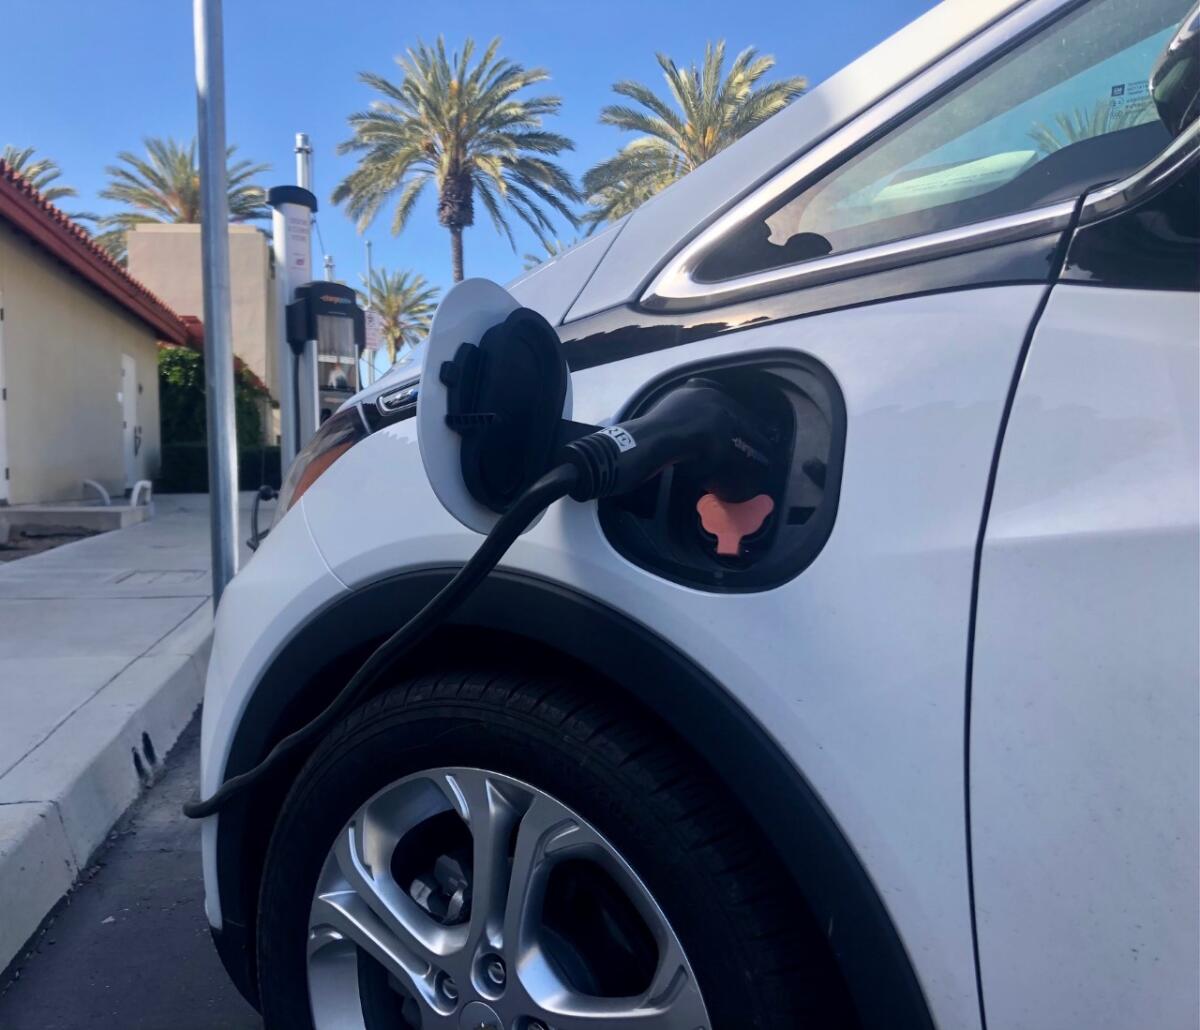 An electric vehicle at a charging station in Chula Vista.